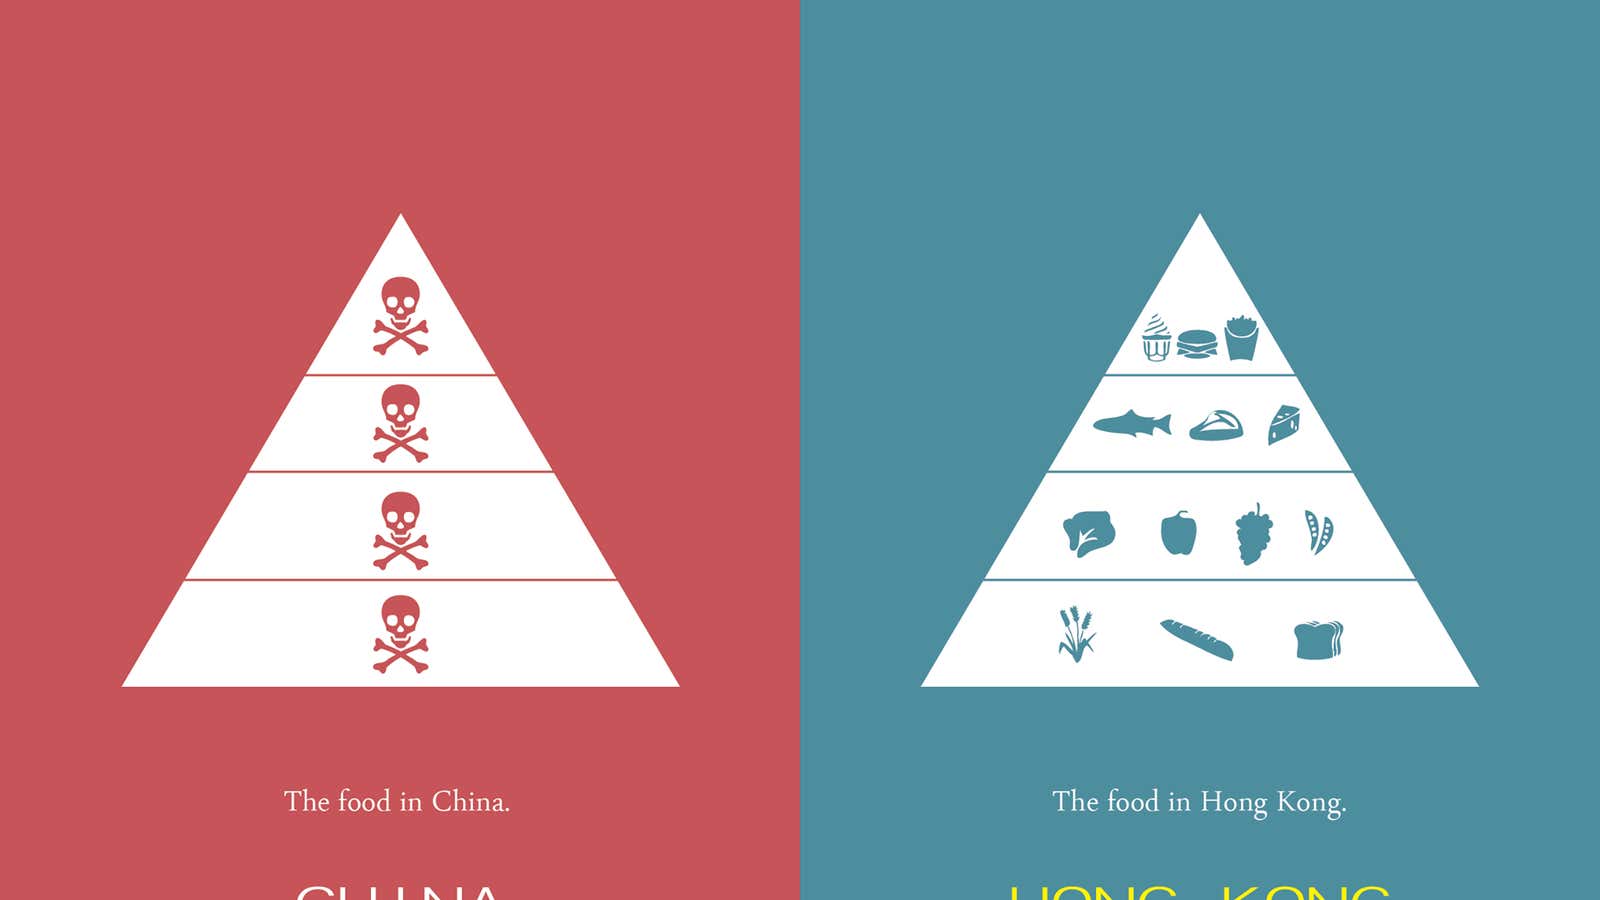 These illustrations show how different Hong Kong thinks it is from mainland China